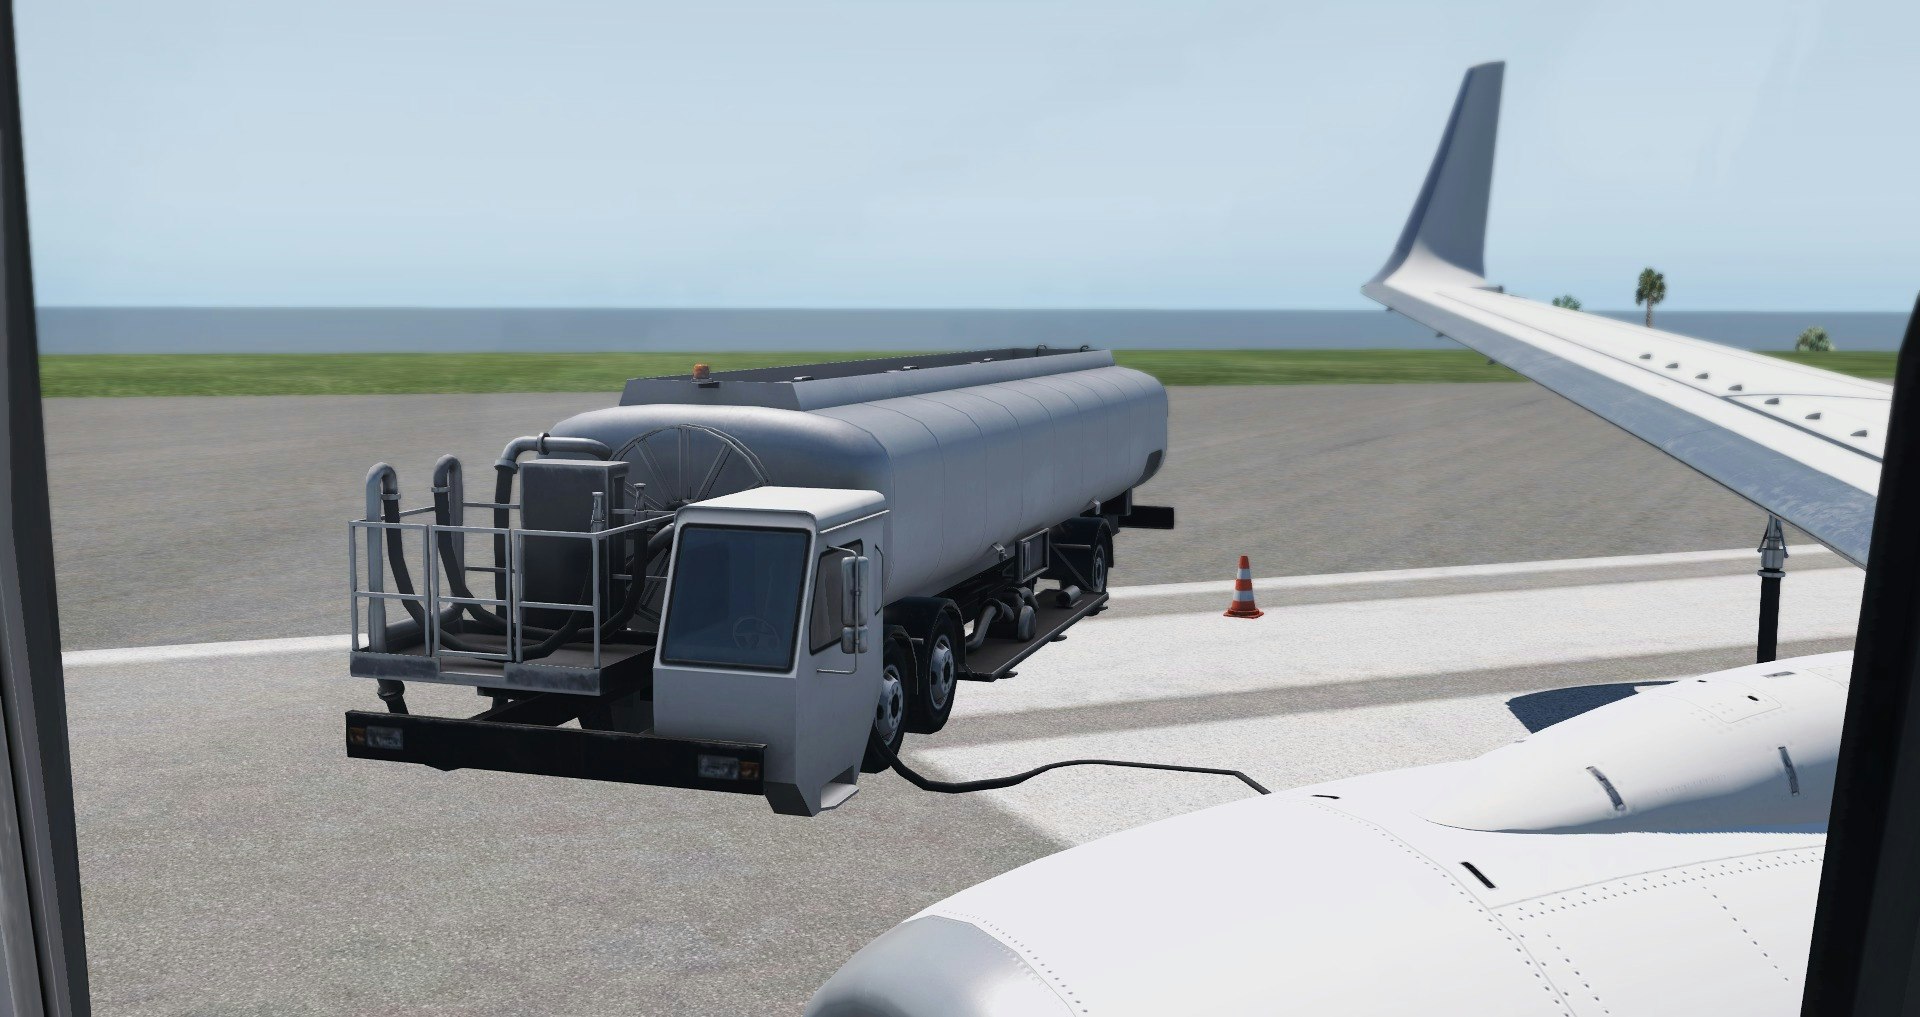 Stairport Sceneries Announces SAM GroundService